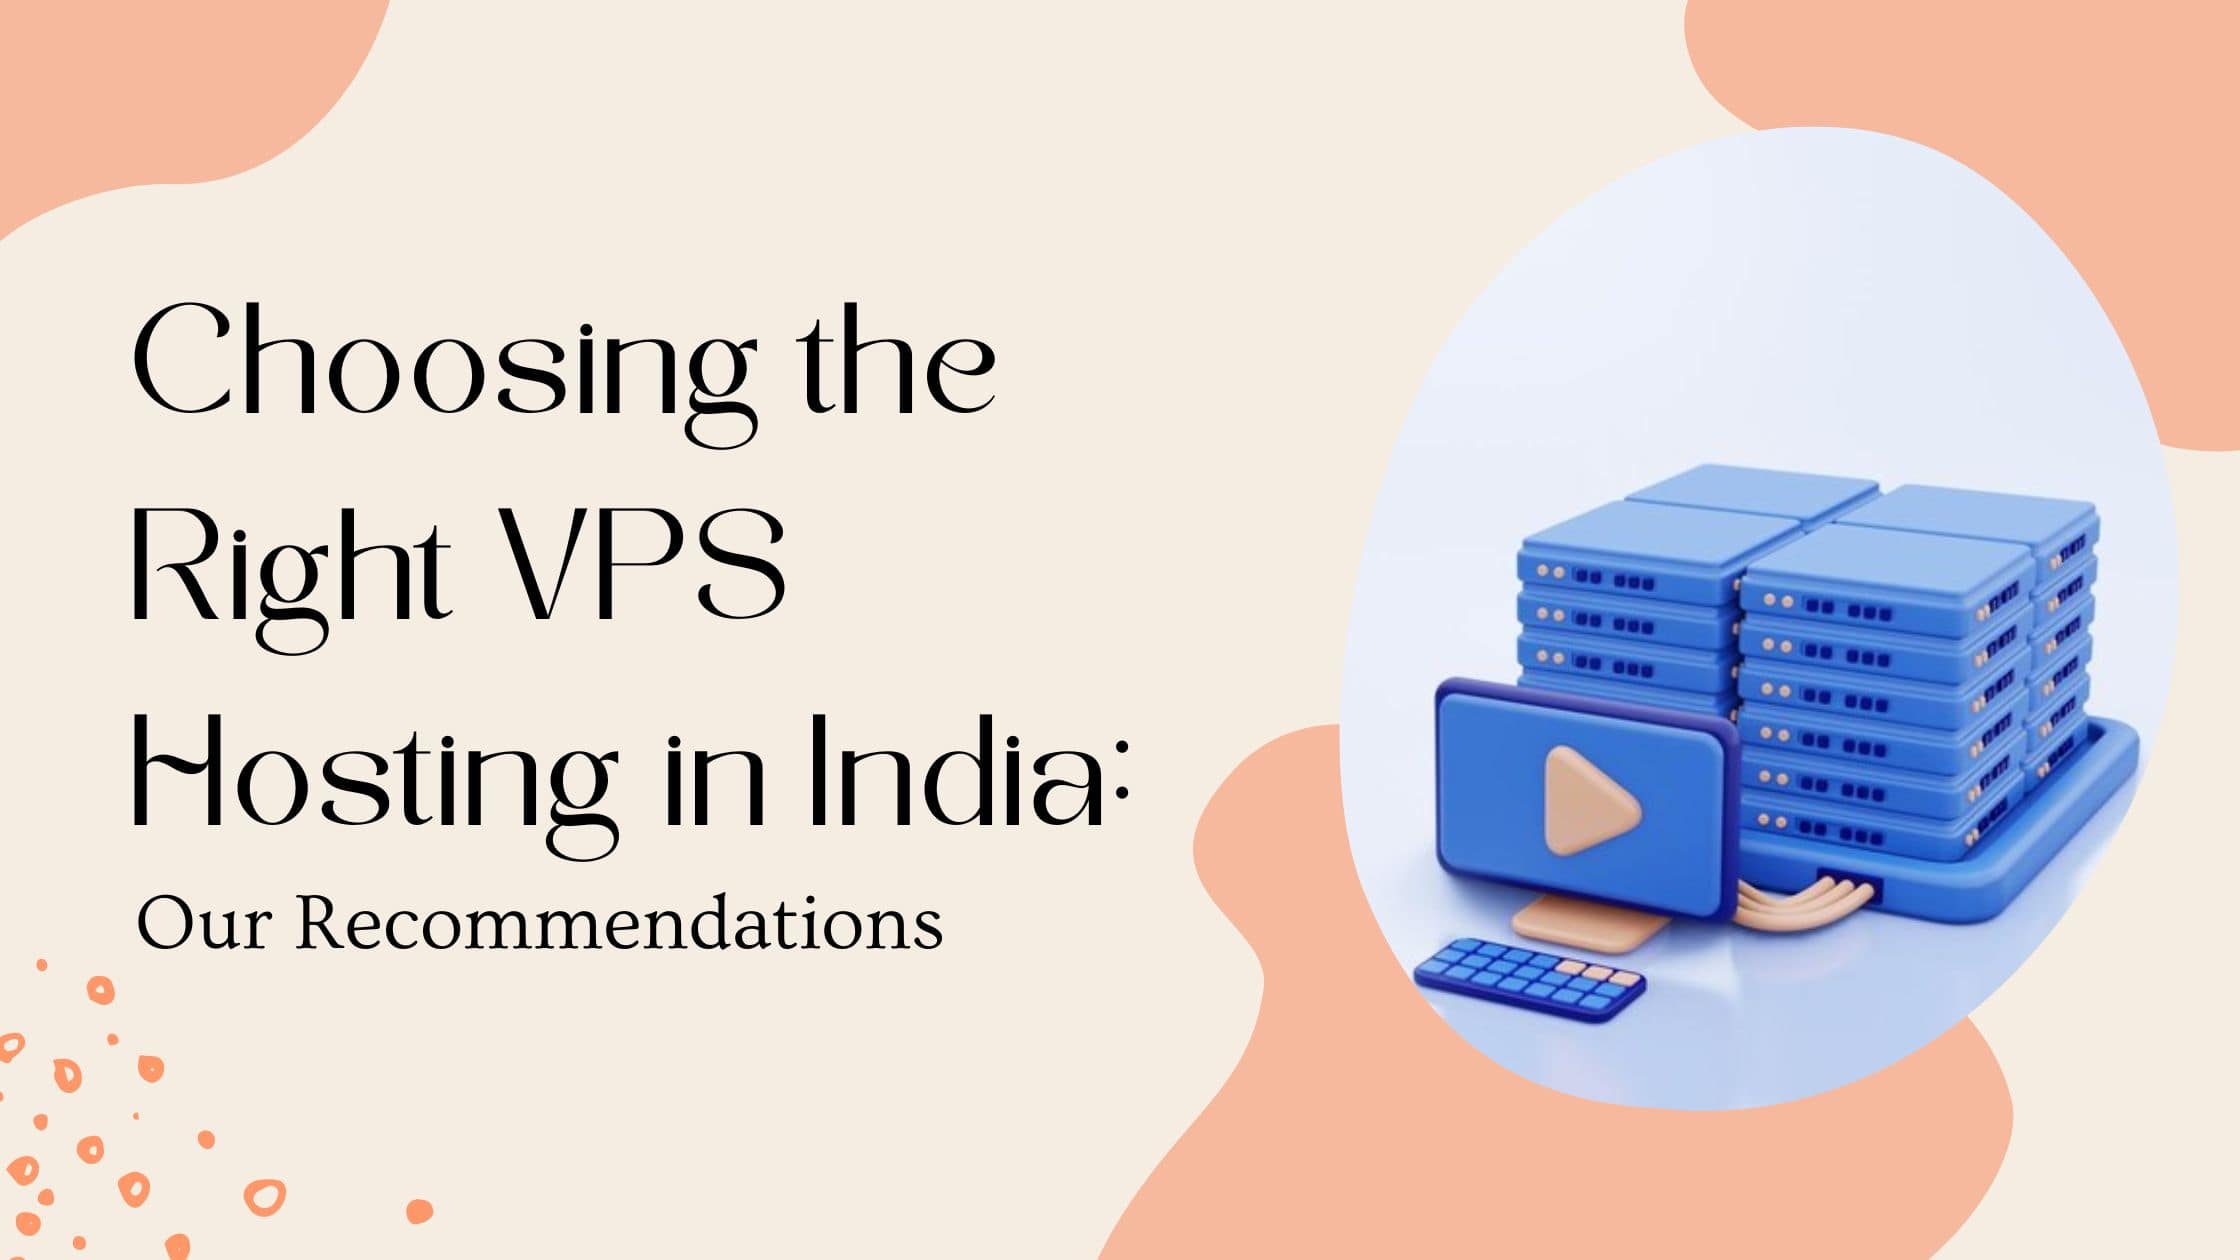 Choosing the Right VPS Hosting in India: Our Recommendations